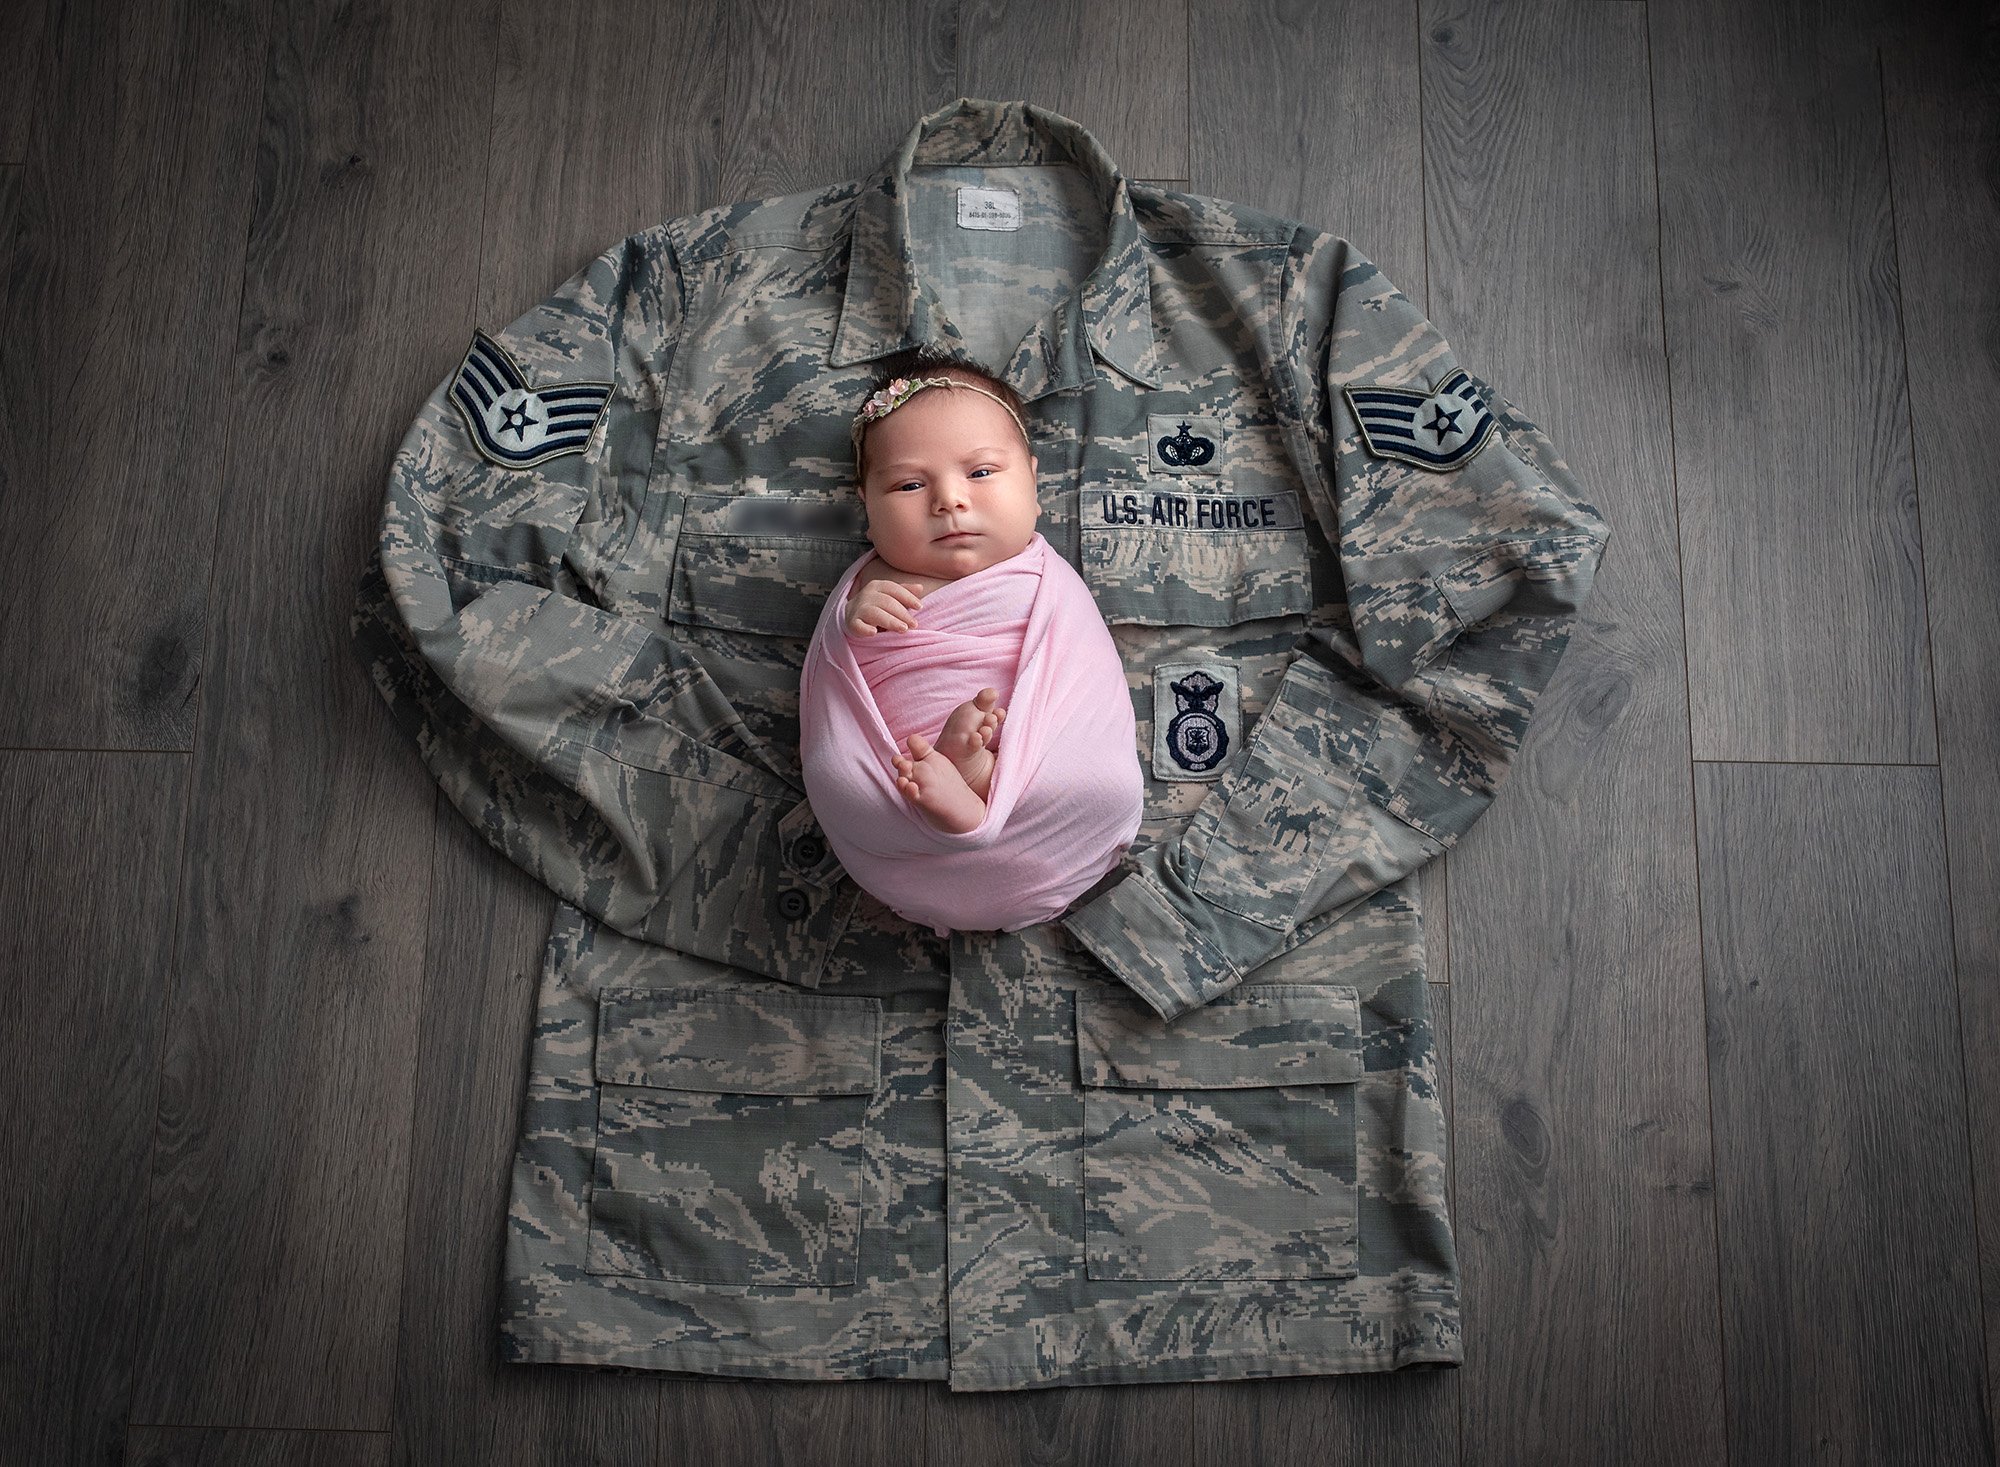 Deployed Military Newborn Photo newborn baby girl swaddled on top of her deployed dad's Air Force uniform